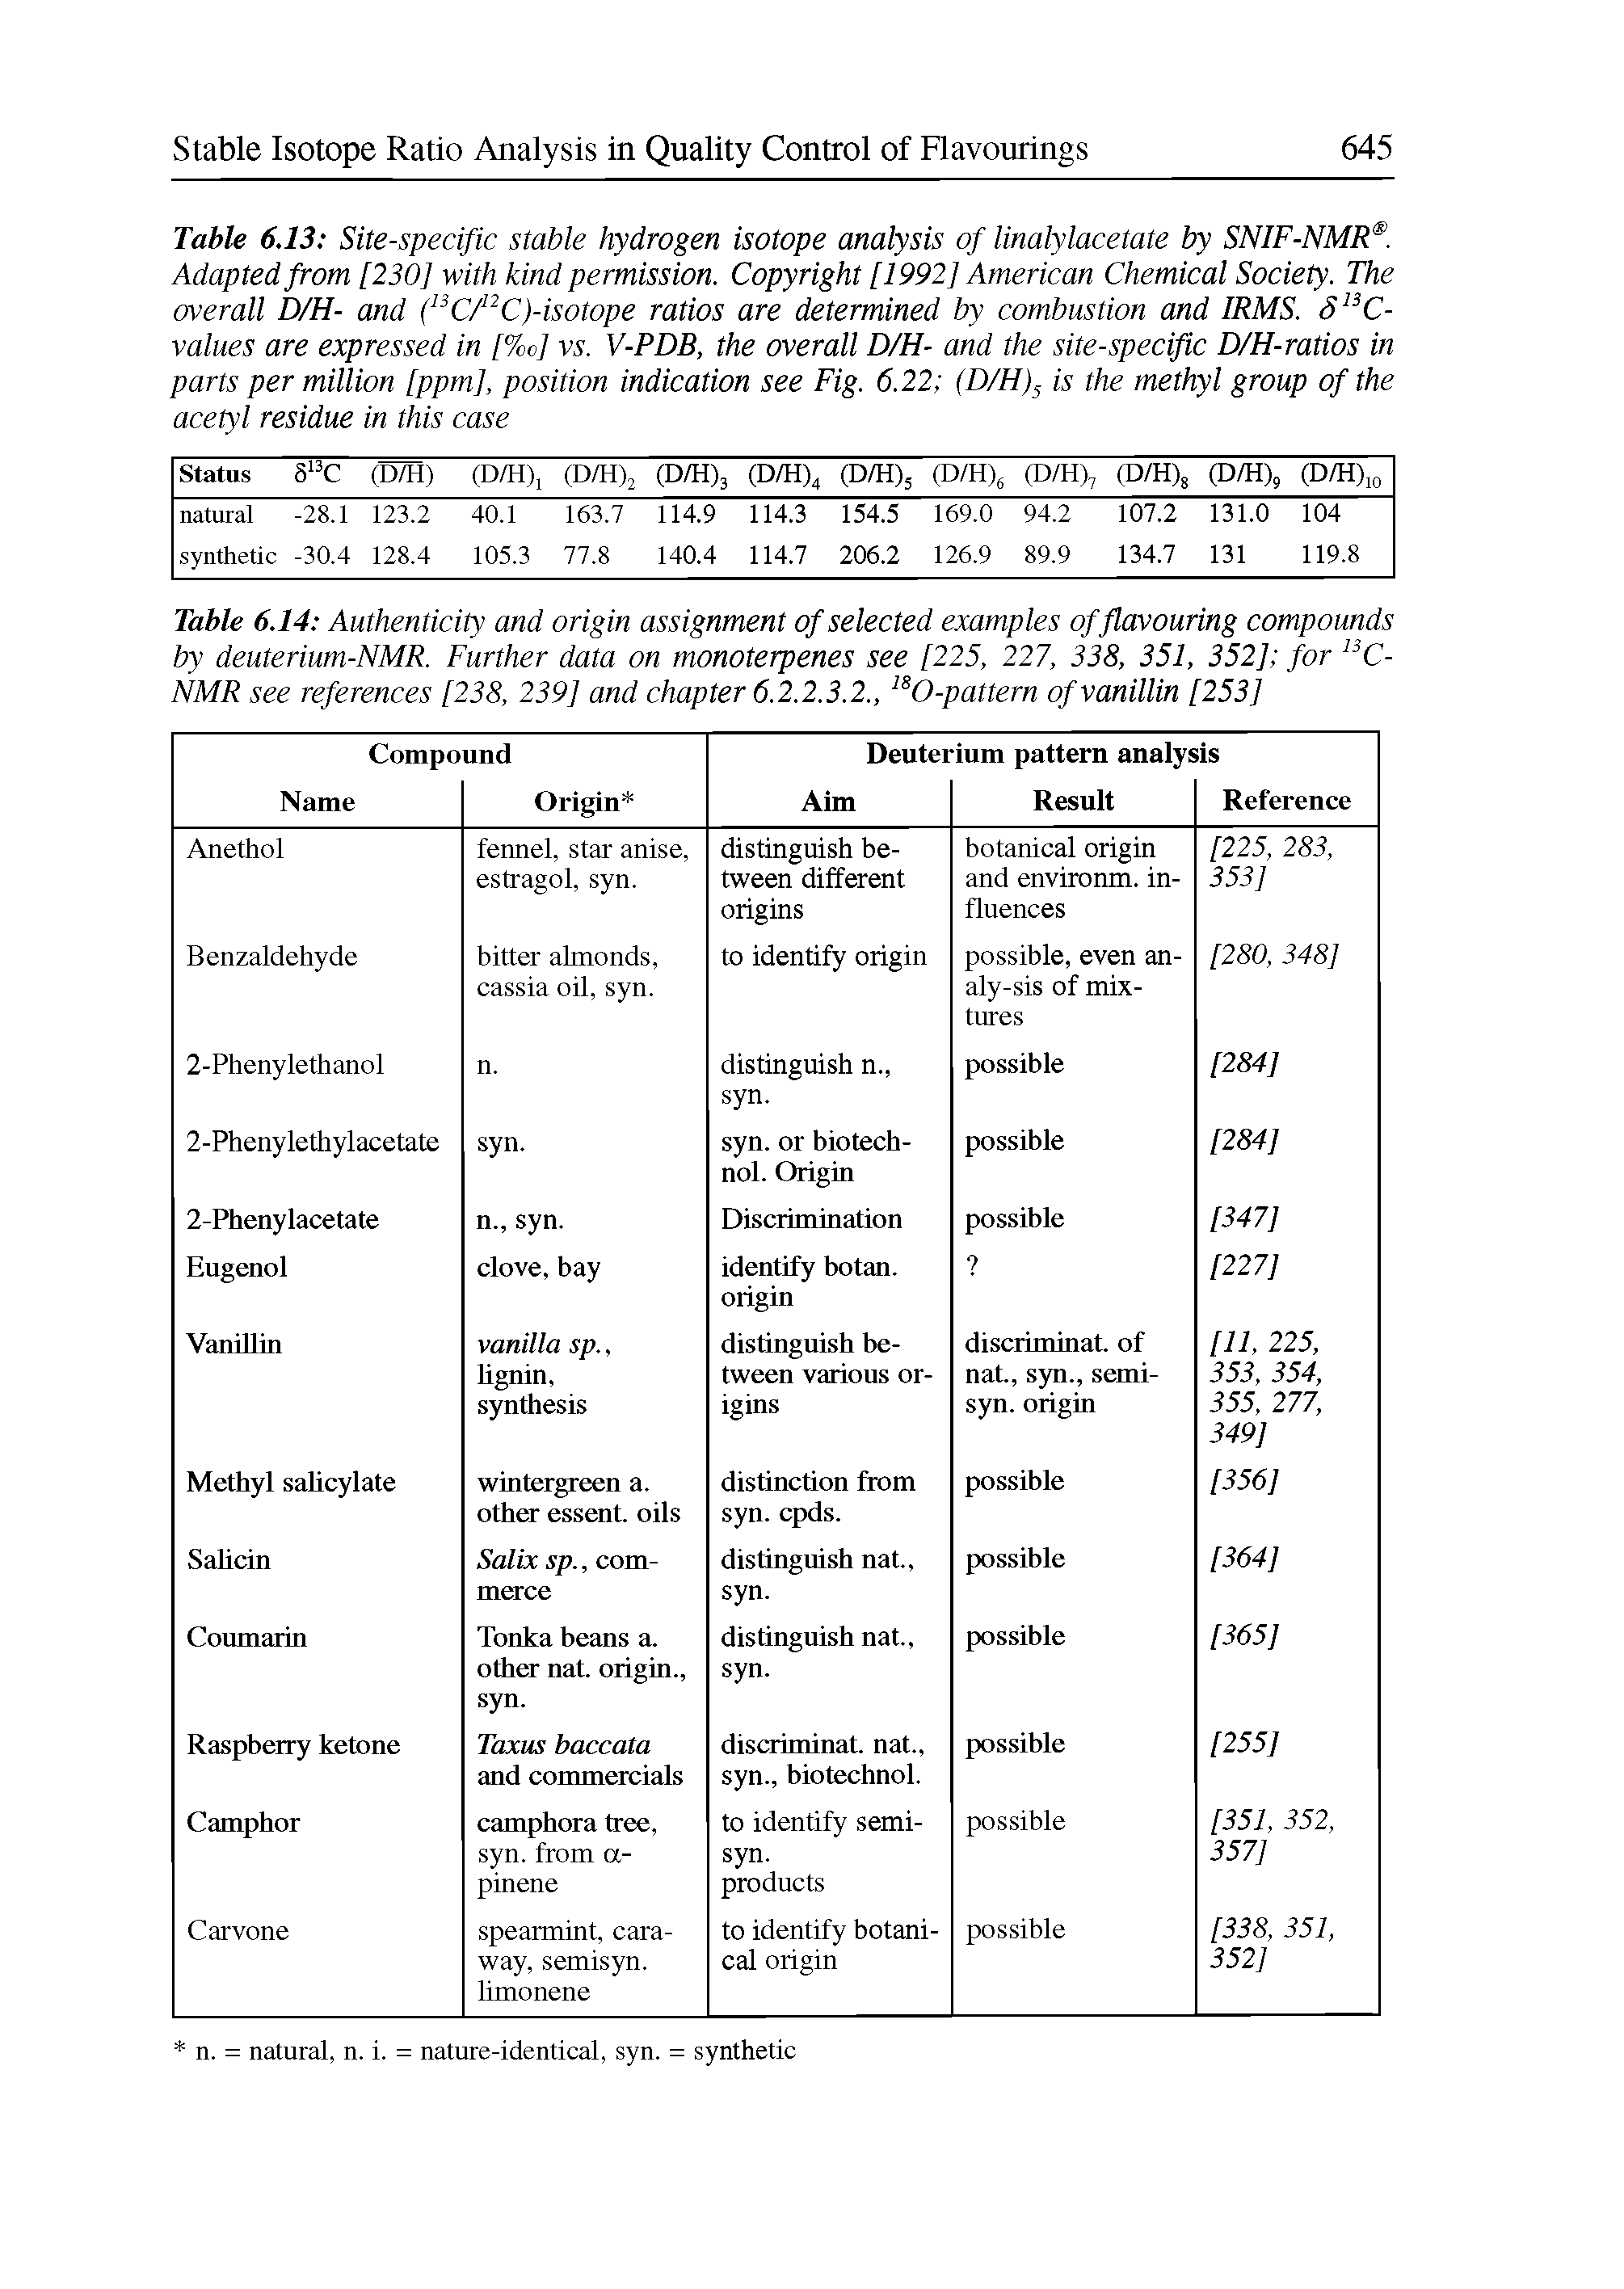 Table 6.13 Site-specific stable hydrogen isotope analysis of linalylacetate by SNIF-NMR. Adapted from [230] with kind permission. Copyright [1992] American Chemical Society. The overall D/H- and ( C/ C)-isotope ratios are determined by combustion and IRMS. S C-values are expressed in [%c[ V5. V-PDB, the overall D/H- and the site-specific D/H-ratios in parts per million [ppm], position indication see Fig. 6.22 (D/H) is the methyl group of the acetyl residue in this case...